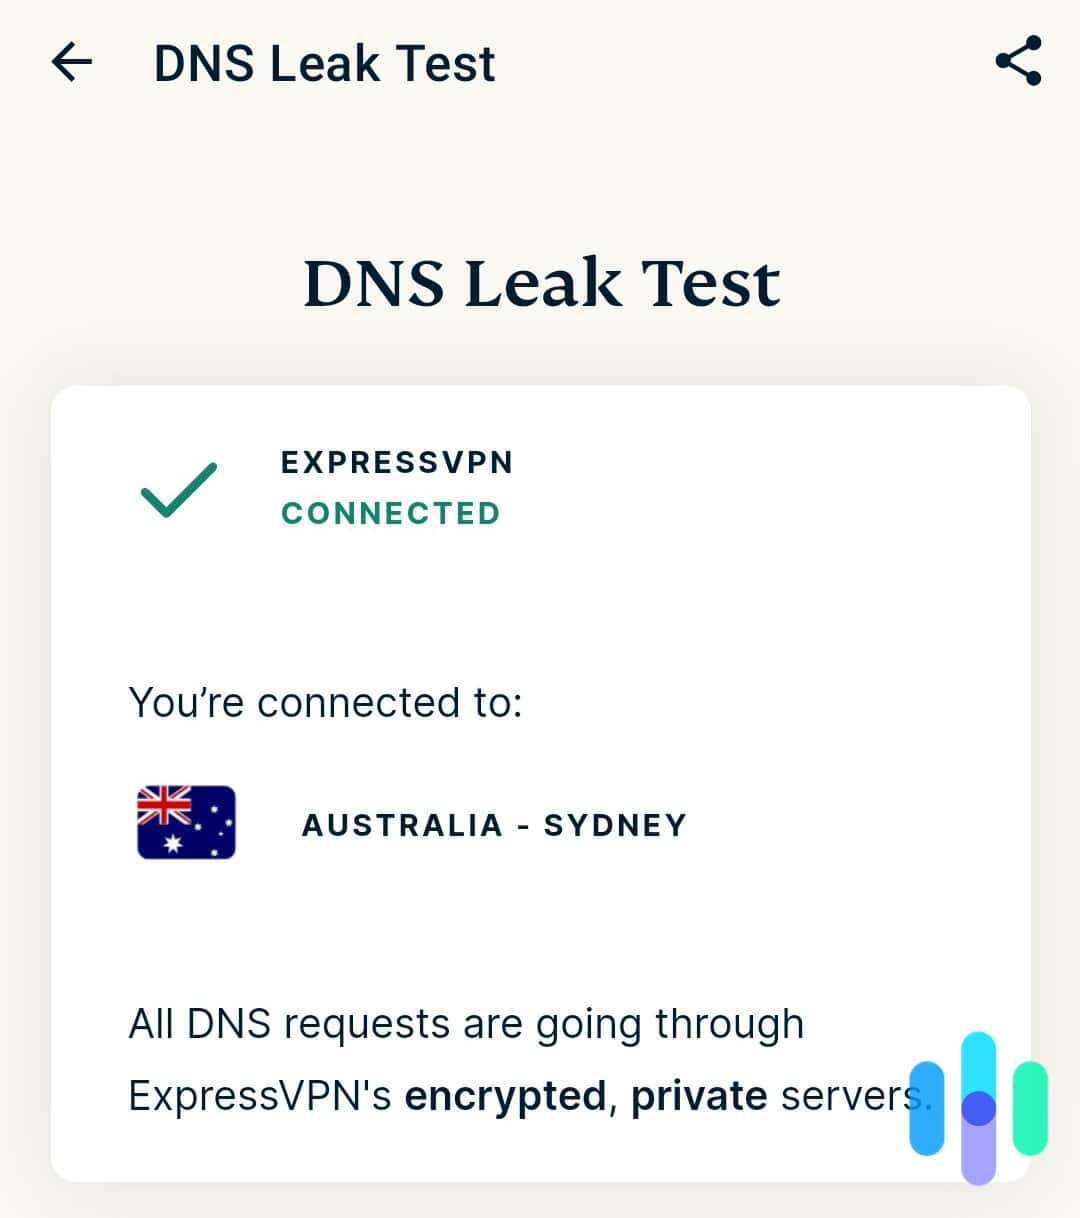 VPNs with working encryption pass DNS leak tests